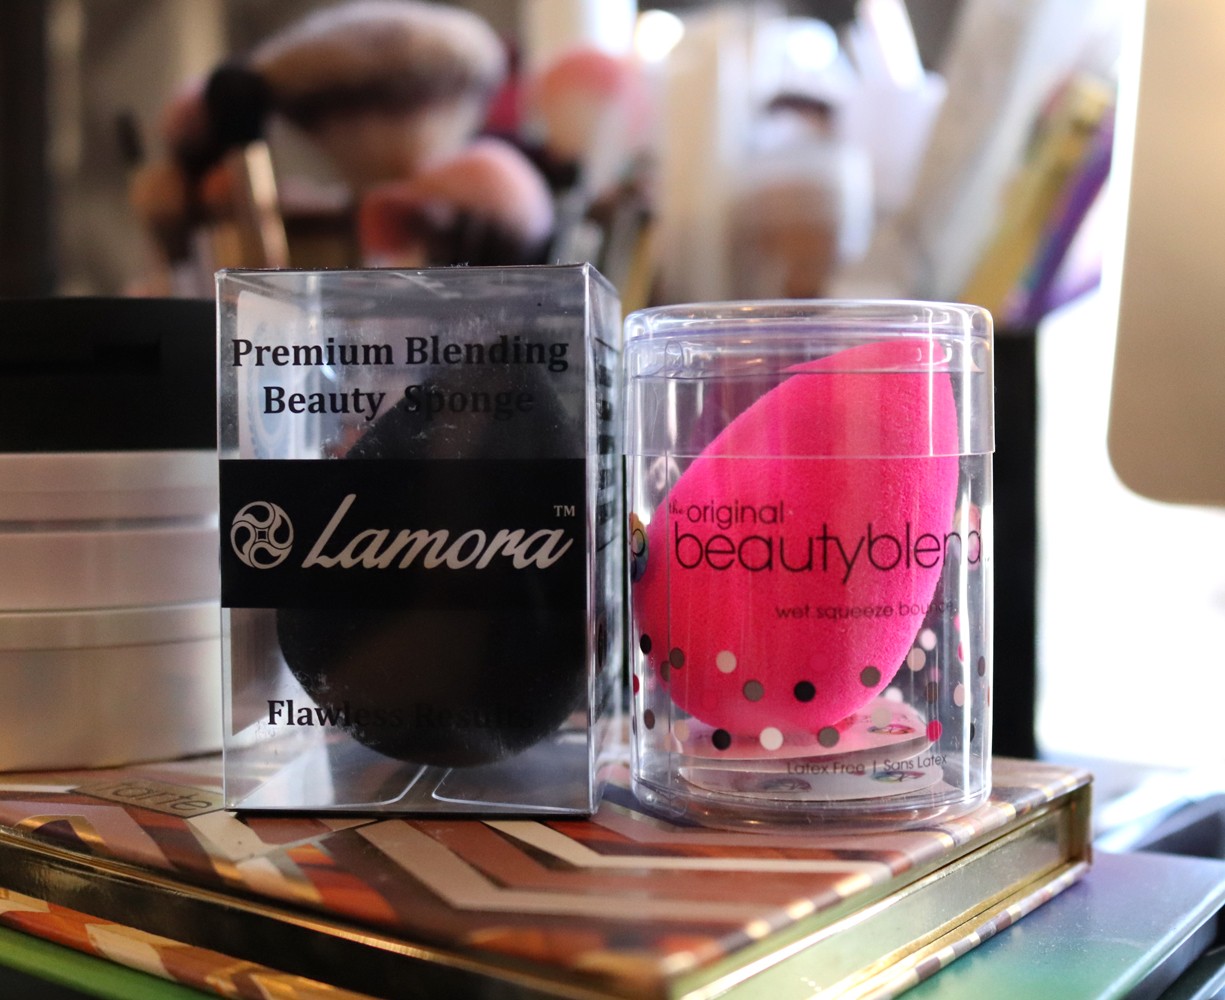 Lamora - Did I Just Find a Beauty Blender Dupe? featured by popular Los Angeles cruelty free beauty blogger My Beauty Bunny